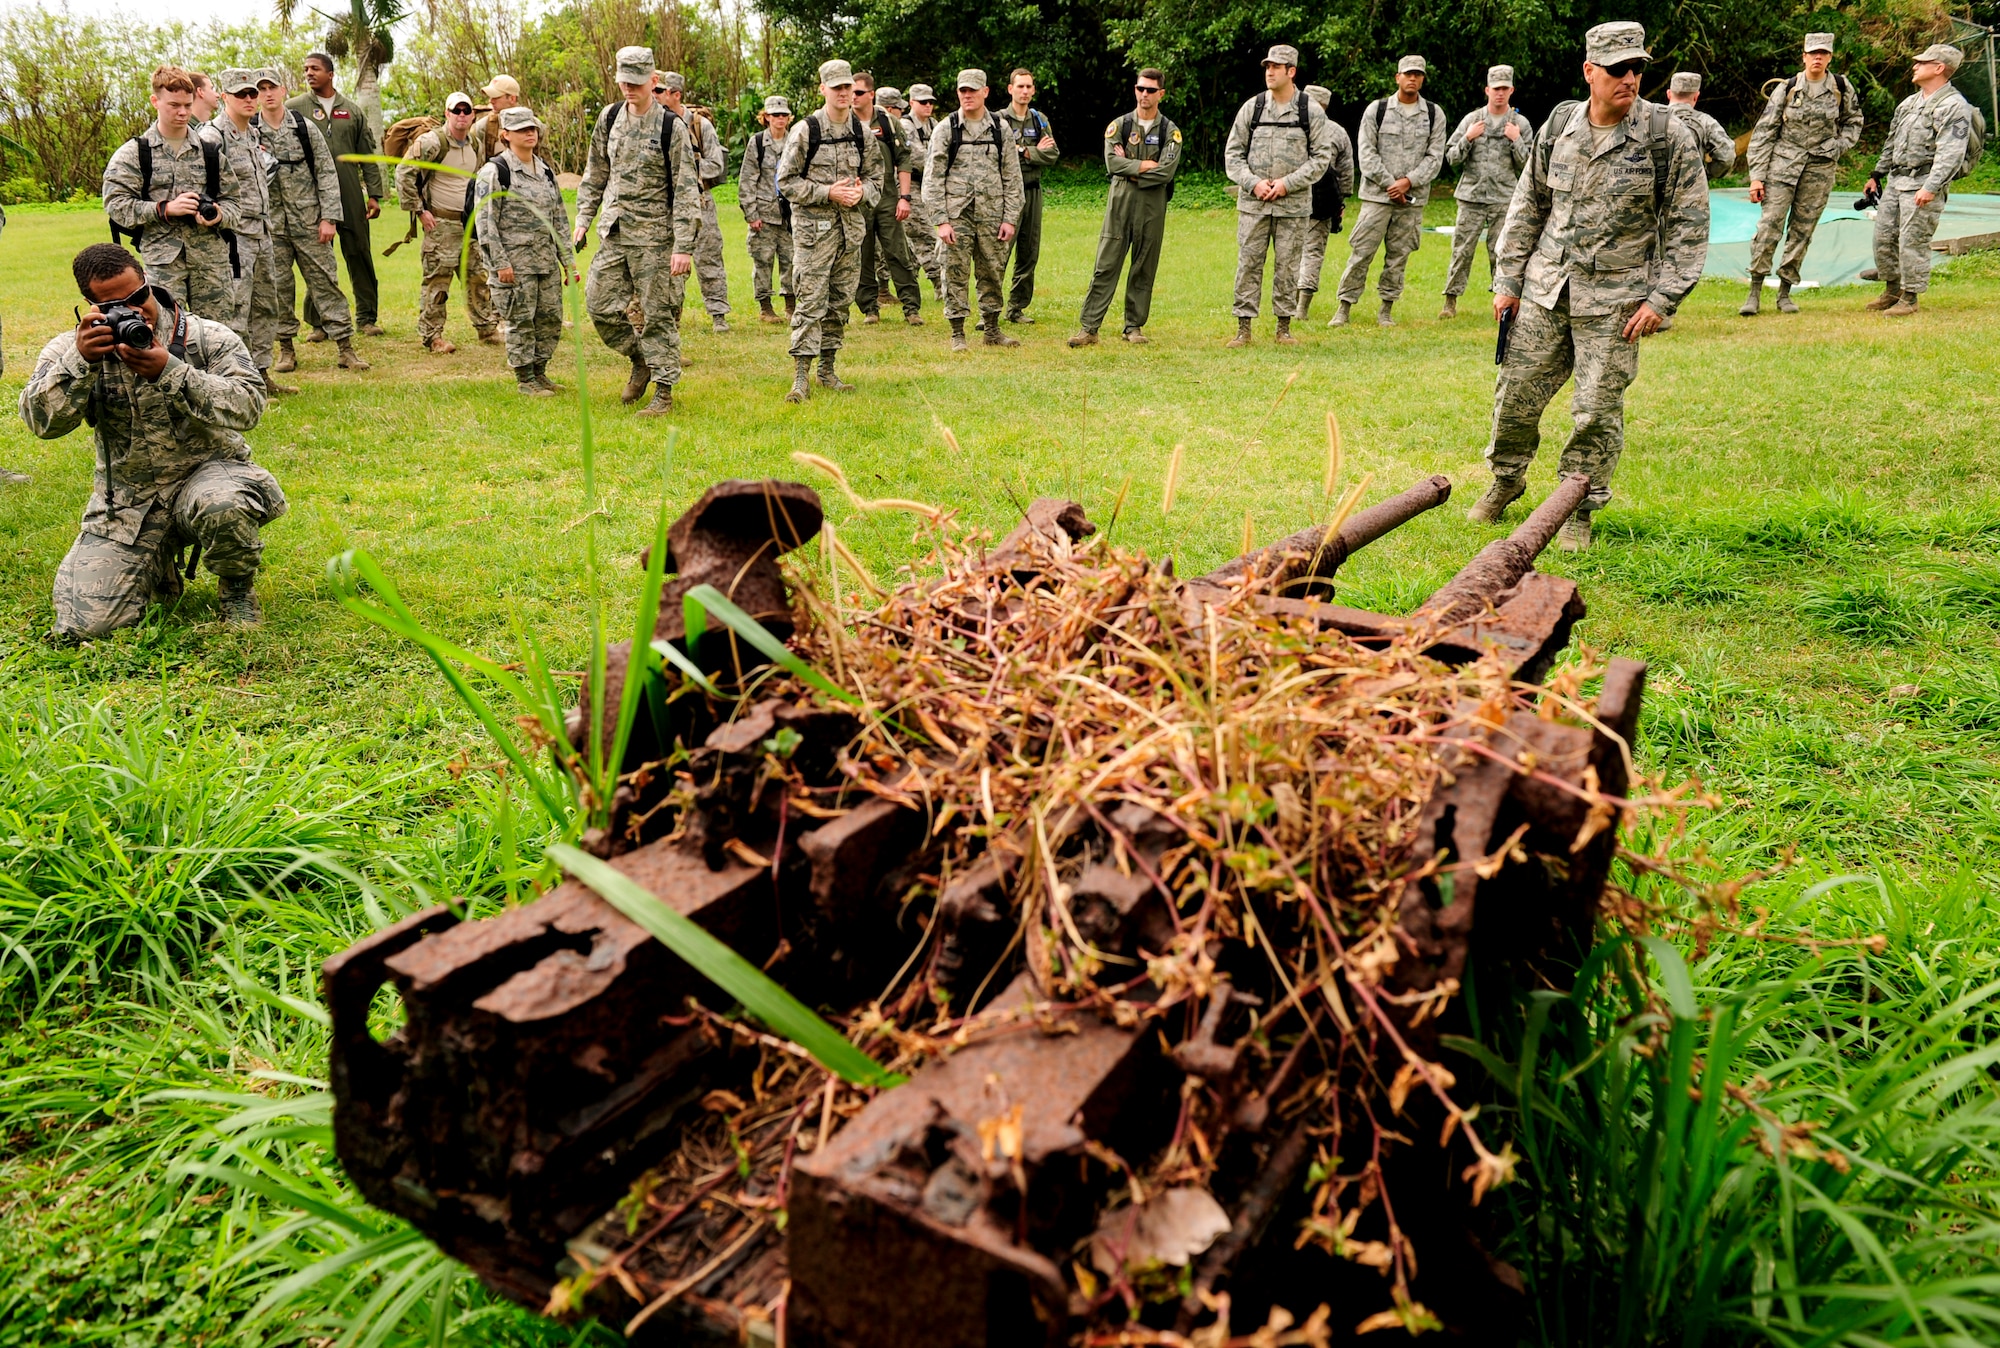 Airmen from Kadena Air Base, Japan, gather around a rusted Type 96 Imperial Japanese Navy 25mm dual-purpose anti-tank/anti-aircraft gun Jan. 8, 2015, on Iwo To, Japan. The island was previously known as Iwo Jima and was the battleground of the largest assault in U.S. Marine Corps history, lasting 36 days and having more than 26,000 Japanese and American casualties. The Airmen traveled on an aircraft conducting a training mission with Iwo To enroute. (U.S. Air Force photo by Airman 1st Class John Linzmeier)